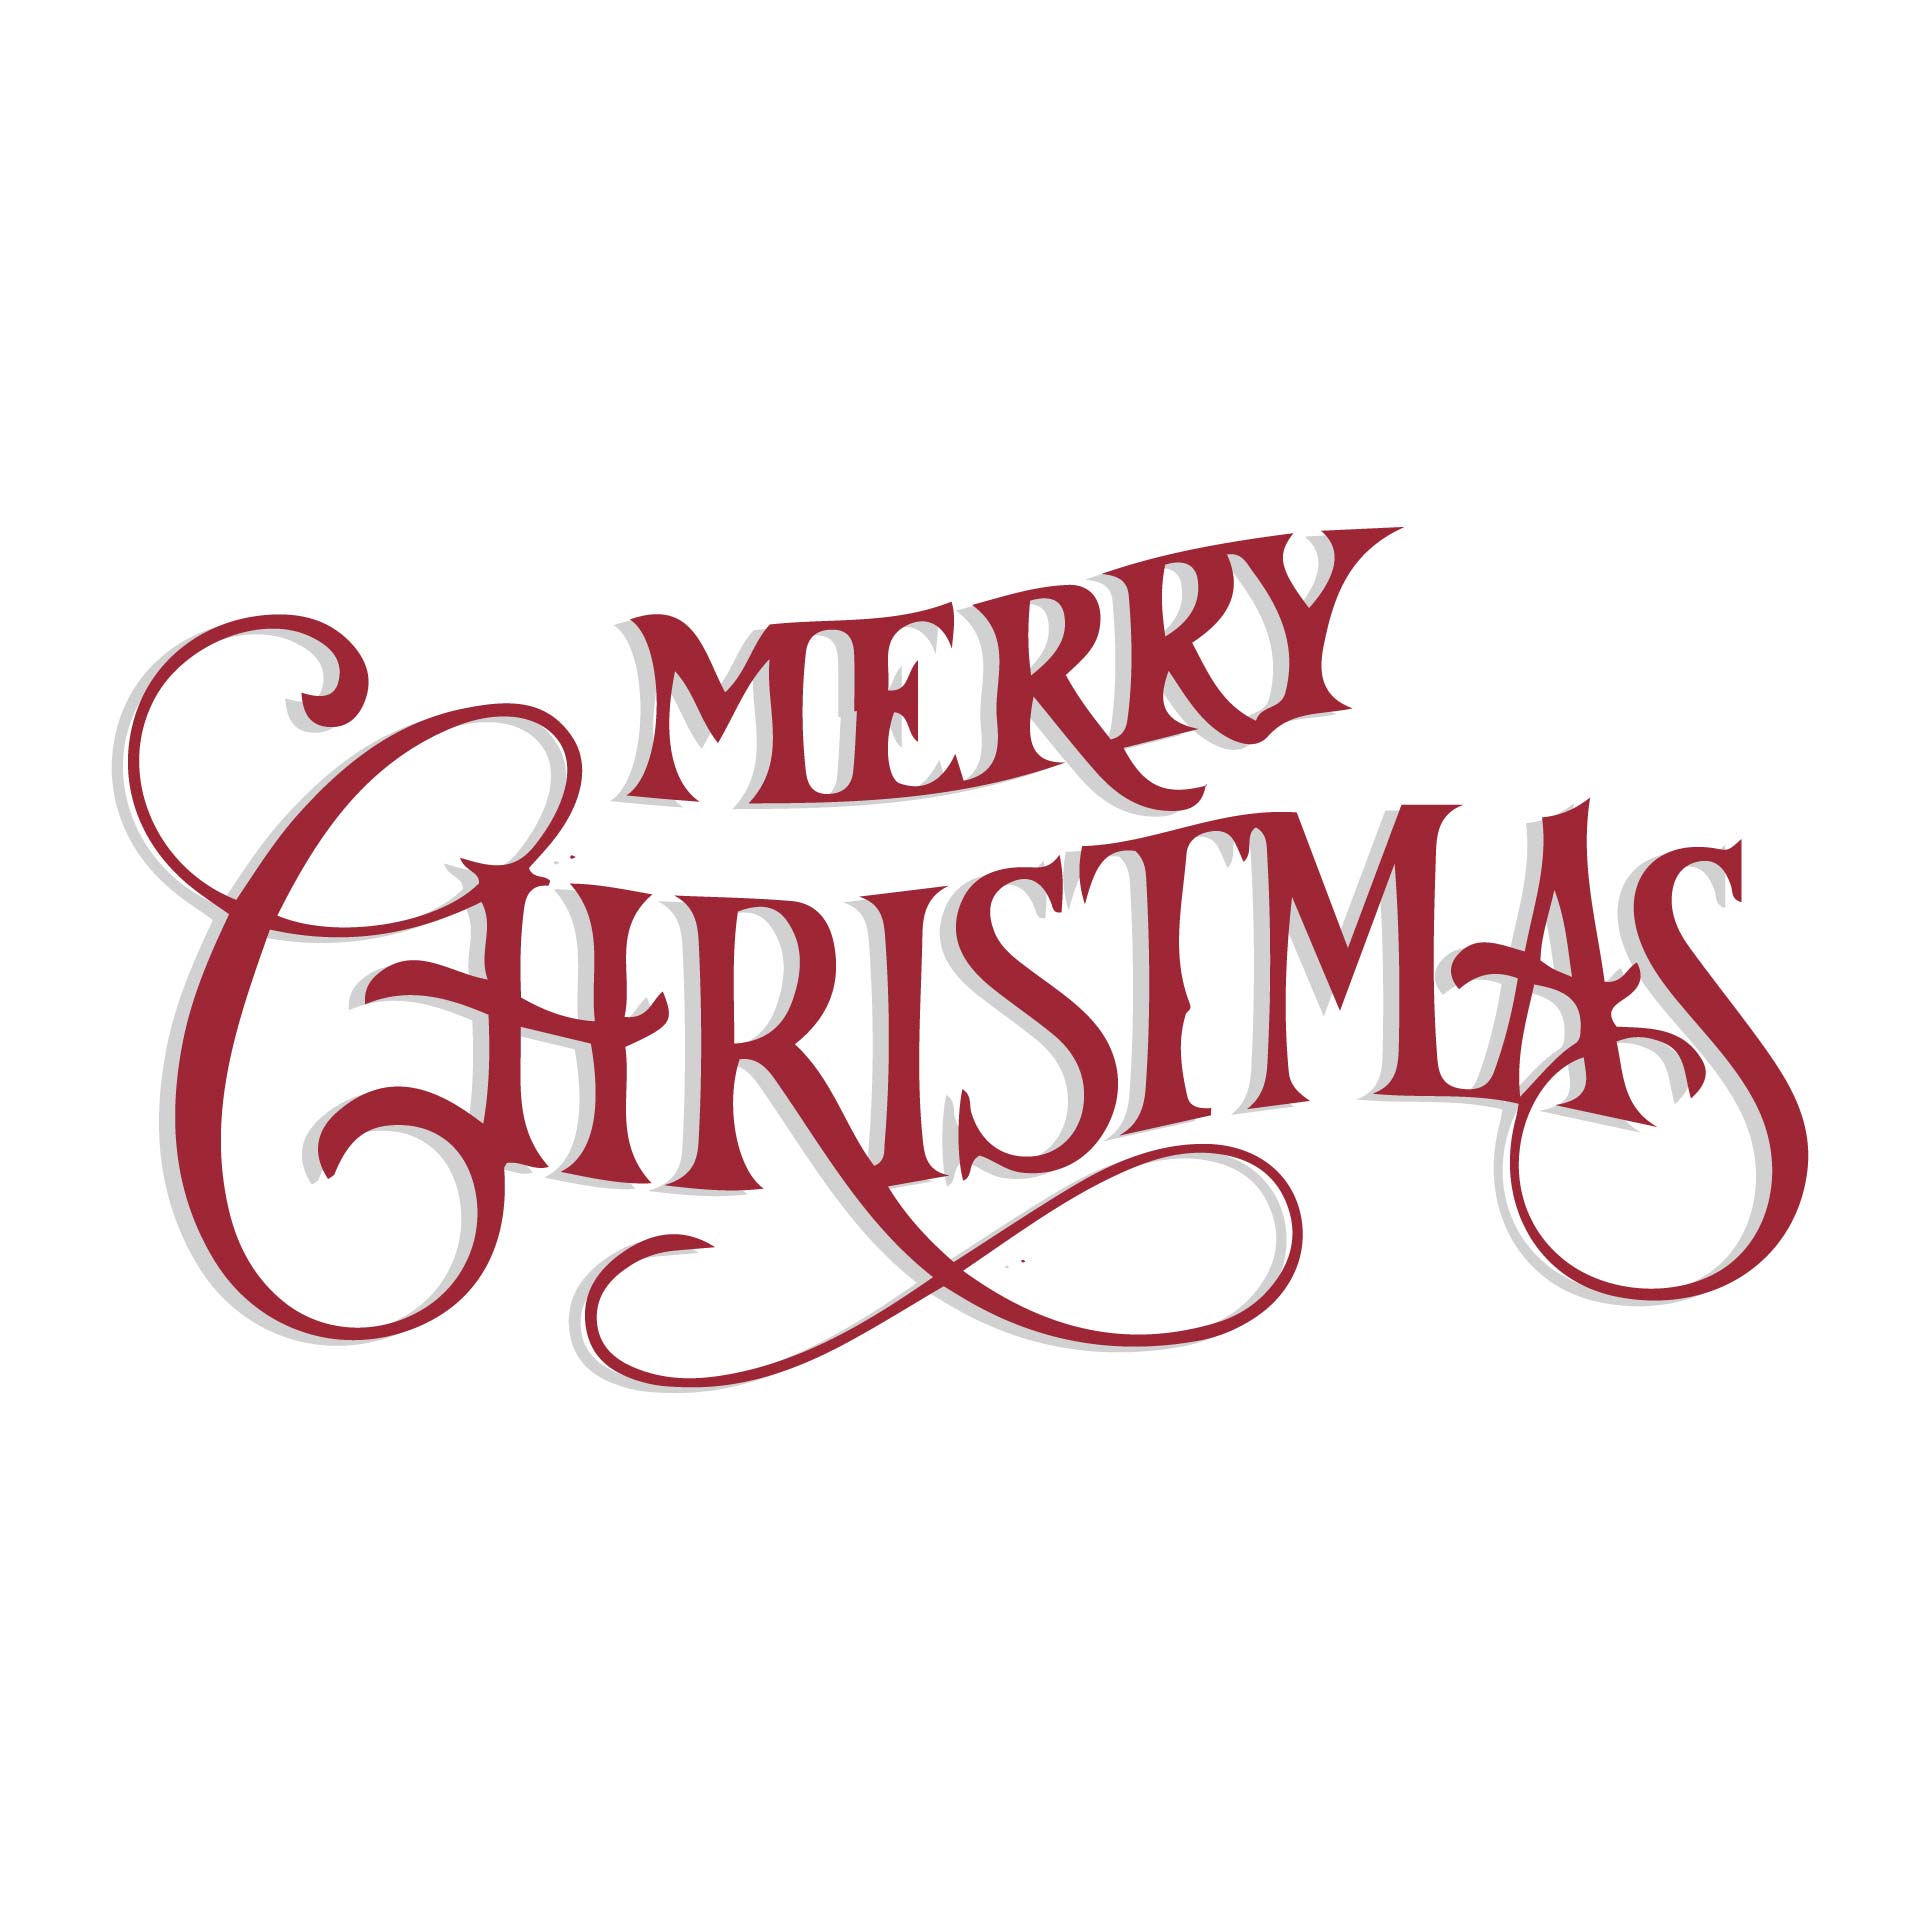 Merry Christmas Red Vintage Calligraphy Lettering Template